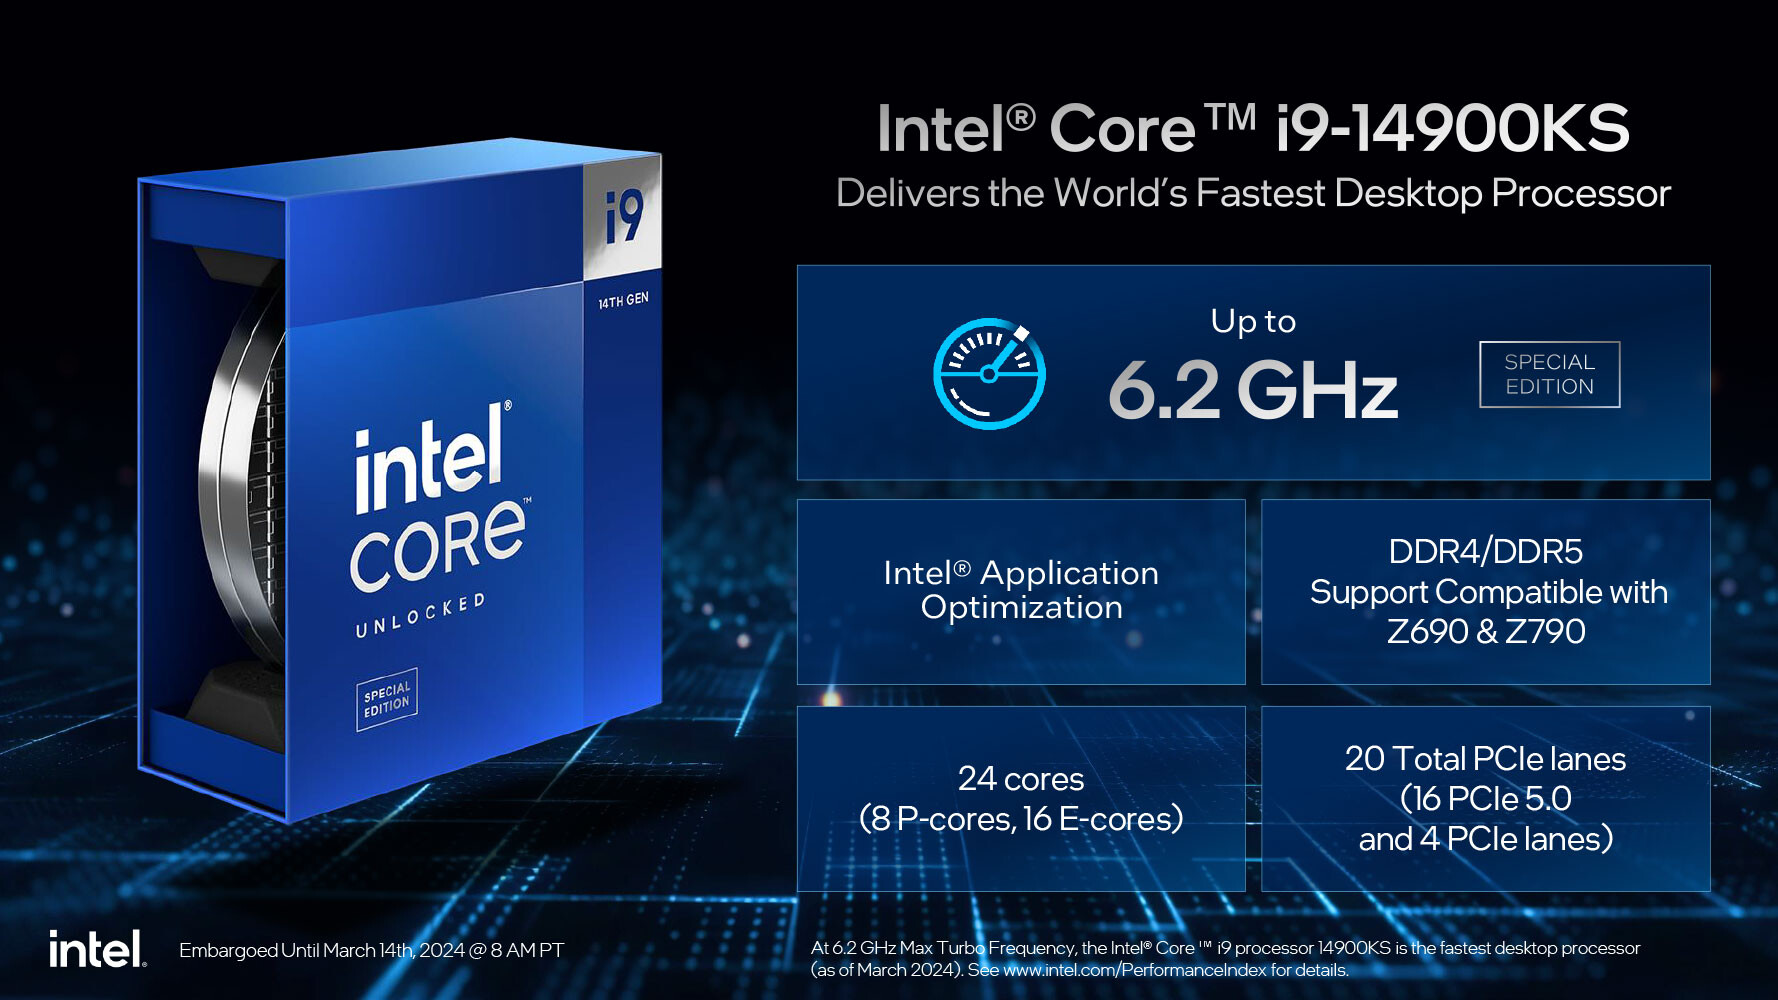 Intel has released the Core i9-14900KS Special Edition Processor catered towards enthusiasts.